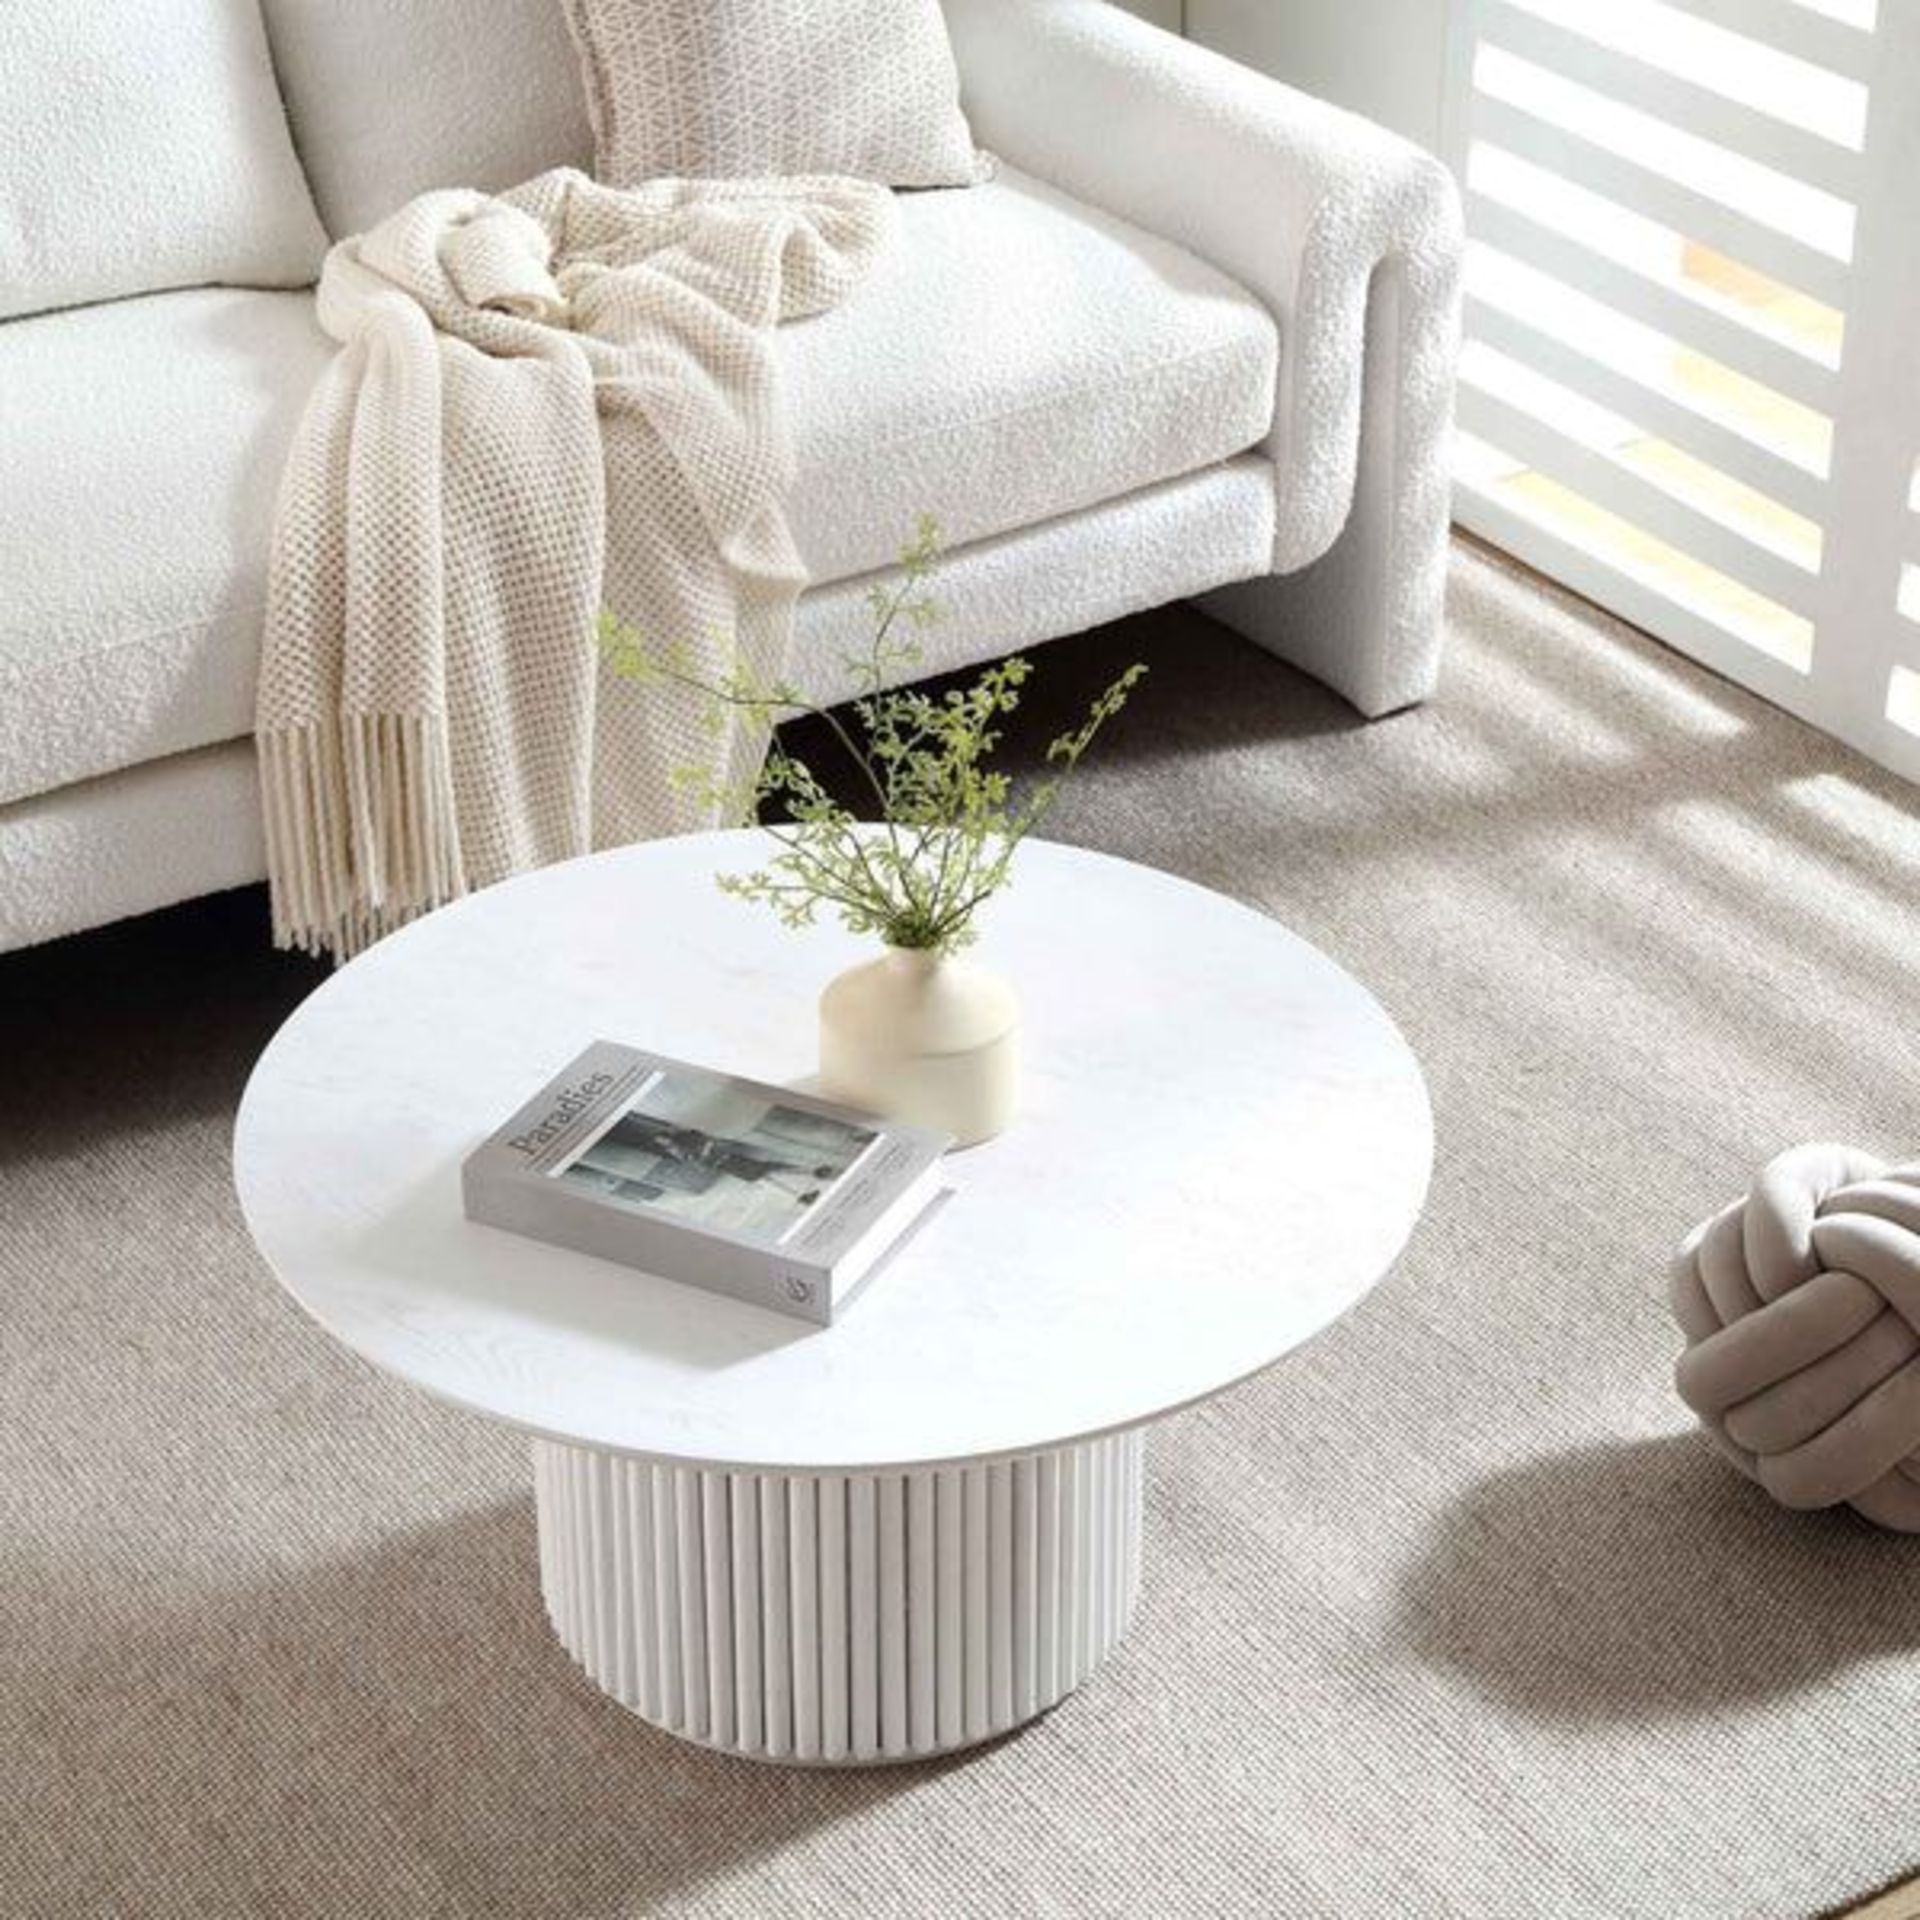 Maru Round Oak Pedestal Coffee Table, Washed White. - ER25. RRP £219.99. Meet the new addition to